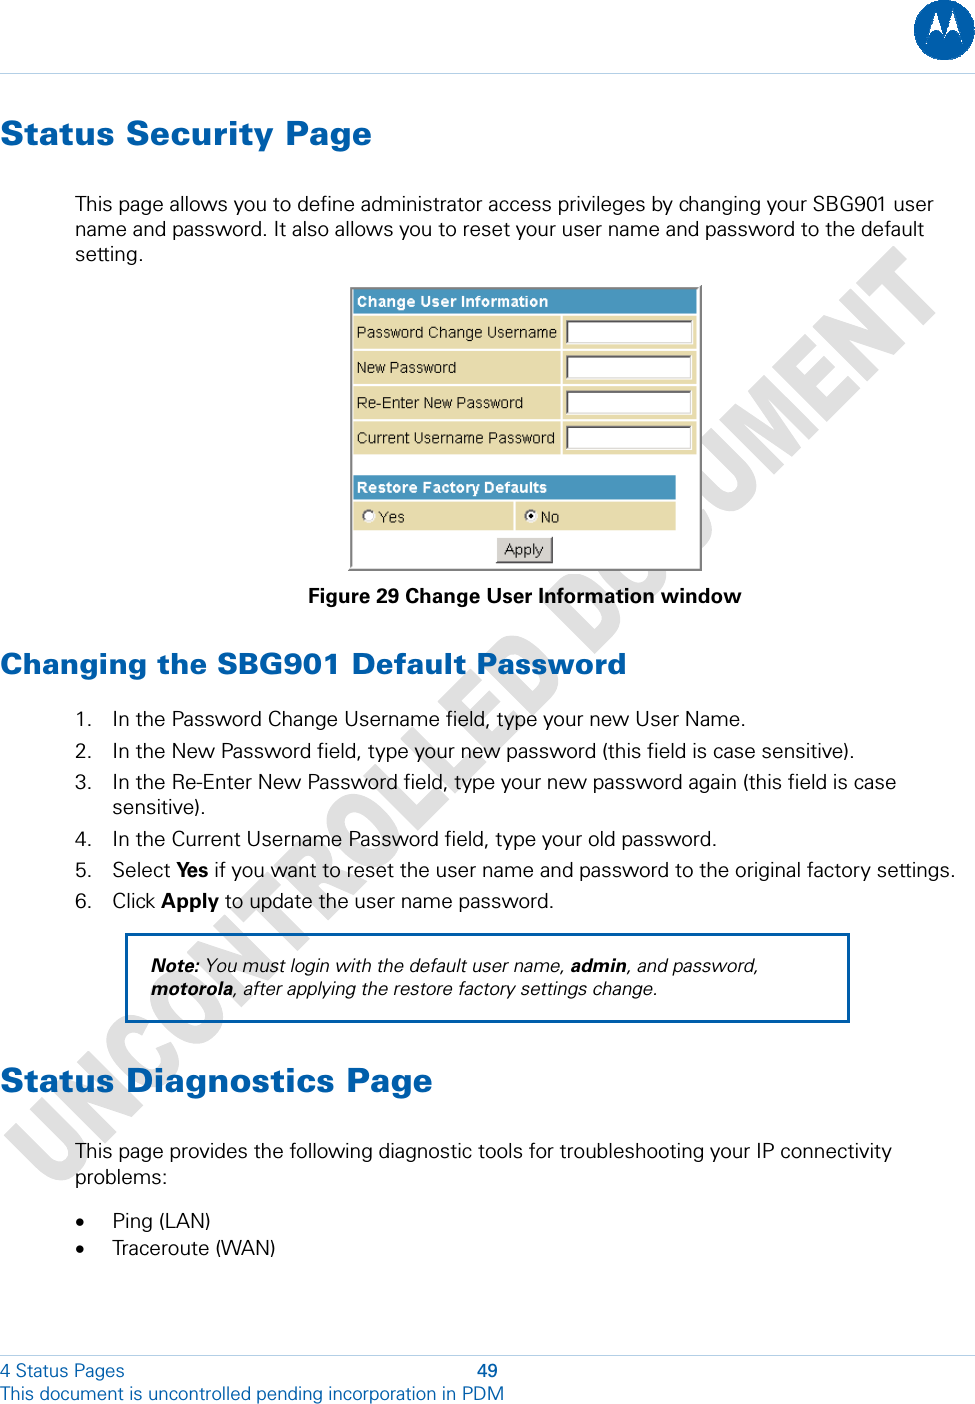  Status Security Page This page allows you to define administrator access privileges by changing your SBG901 user name and password. It also allows you to reset your user name and password to the default setting.  Figure 29 Change User Information window Changing the SBG901 Default Password 1. In the Password Change Username field, type your new User Name.  2. In the New Password field, type your new password (this field is case sensitive). 3. In the Re-Enter New Password field, type your new password again (this field is case sensitive). 4. In the Current Username Password field, type your old password. 5. Select Ye s  if you want to reset the user name and password to the original factory settings. 6. Click Apply to update the user name password. Note: You must login with the default user name, admin, and password, motorola, after applying the restore factory settings change. Status Diagnostics Page This page provides the following diagnostic tools for troubleshooting your IP connectivity problems: • Ping (LAN) • Traceroute (WAN) 4 Status Pages  49 This document is uncontrolled pending incorporation in PDM  